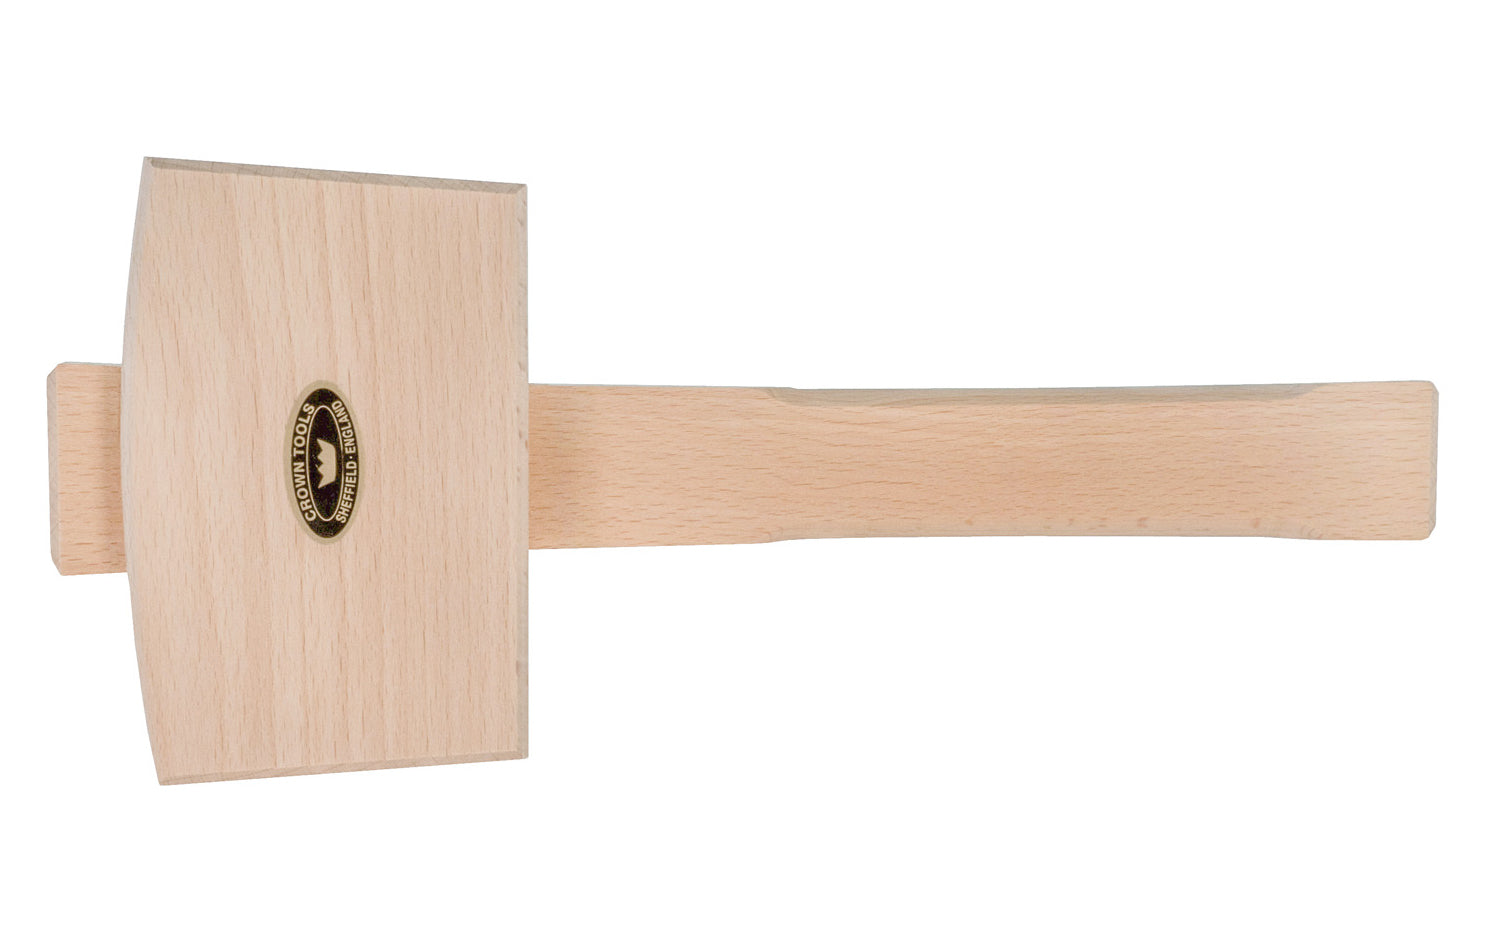 4-1/2" Beechwood mallet made by Crown Tools in England. Model 106. High quality mallet is very sturdy & durable. Manufactured from the finest kiln dried Beech. Great for woodworking applications, chisel work, cabinet making, boat building, furniture work, & more. Handle is not lacquered. Made in Sheffield, England. 